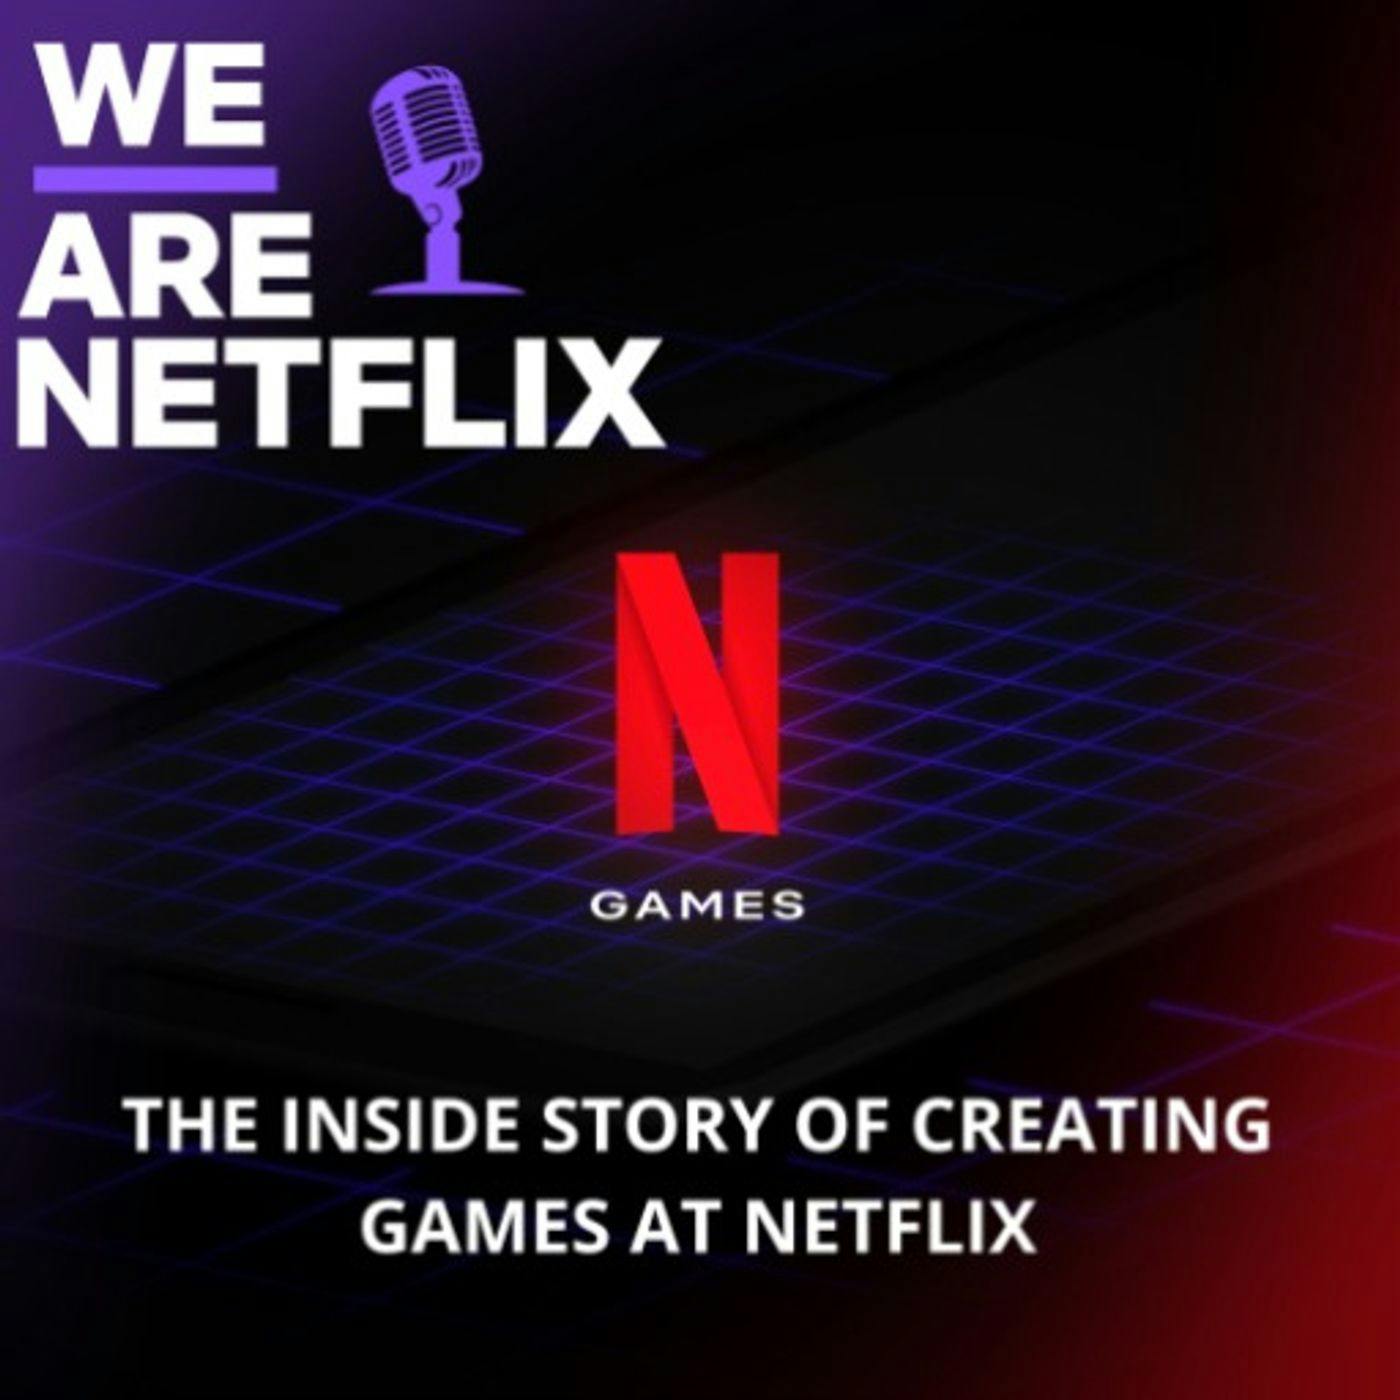 The Inside Story of Creating Games at Netflix